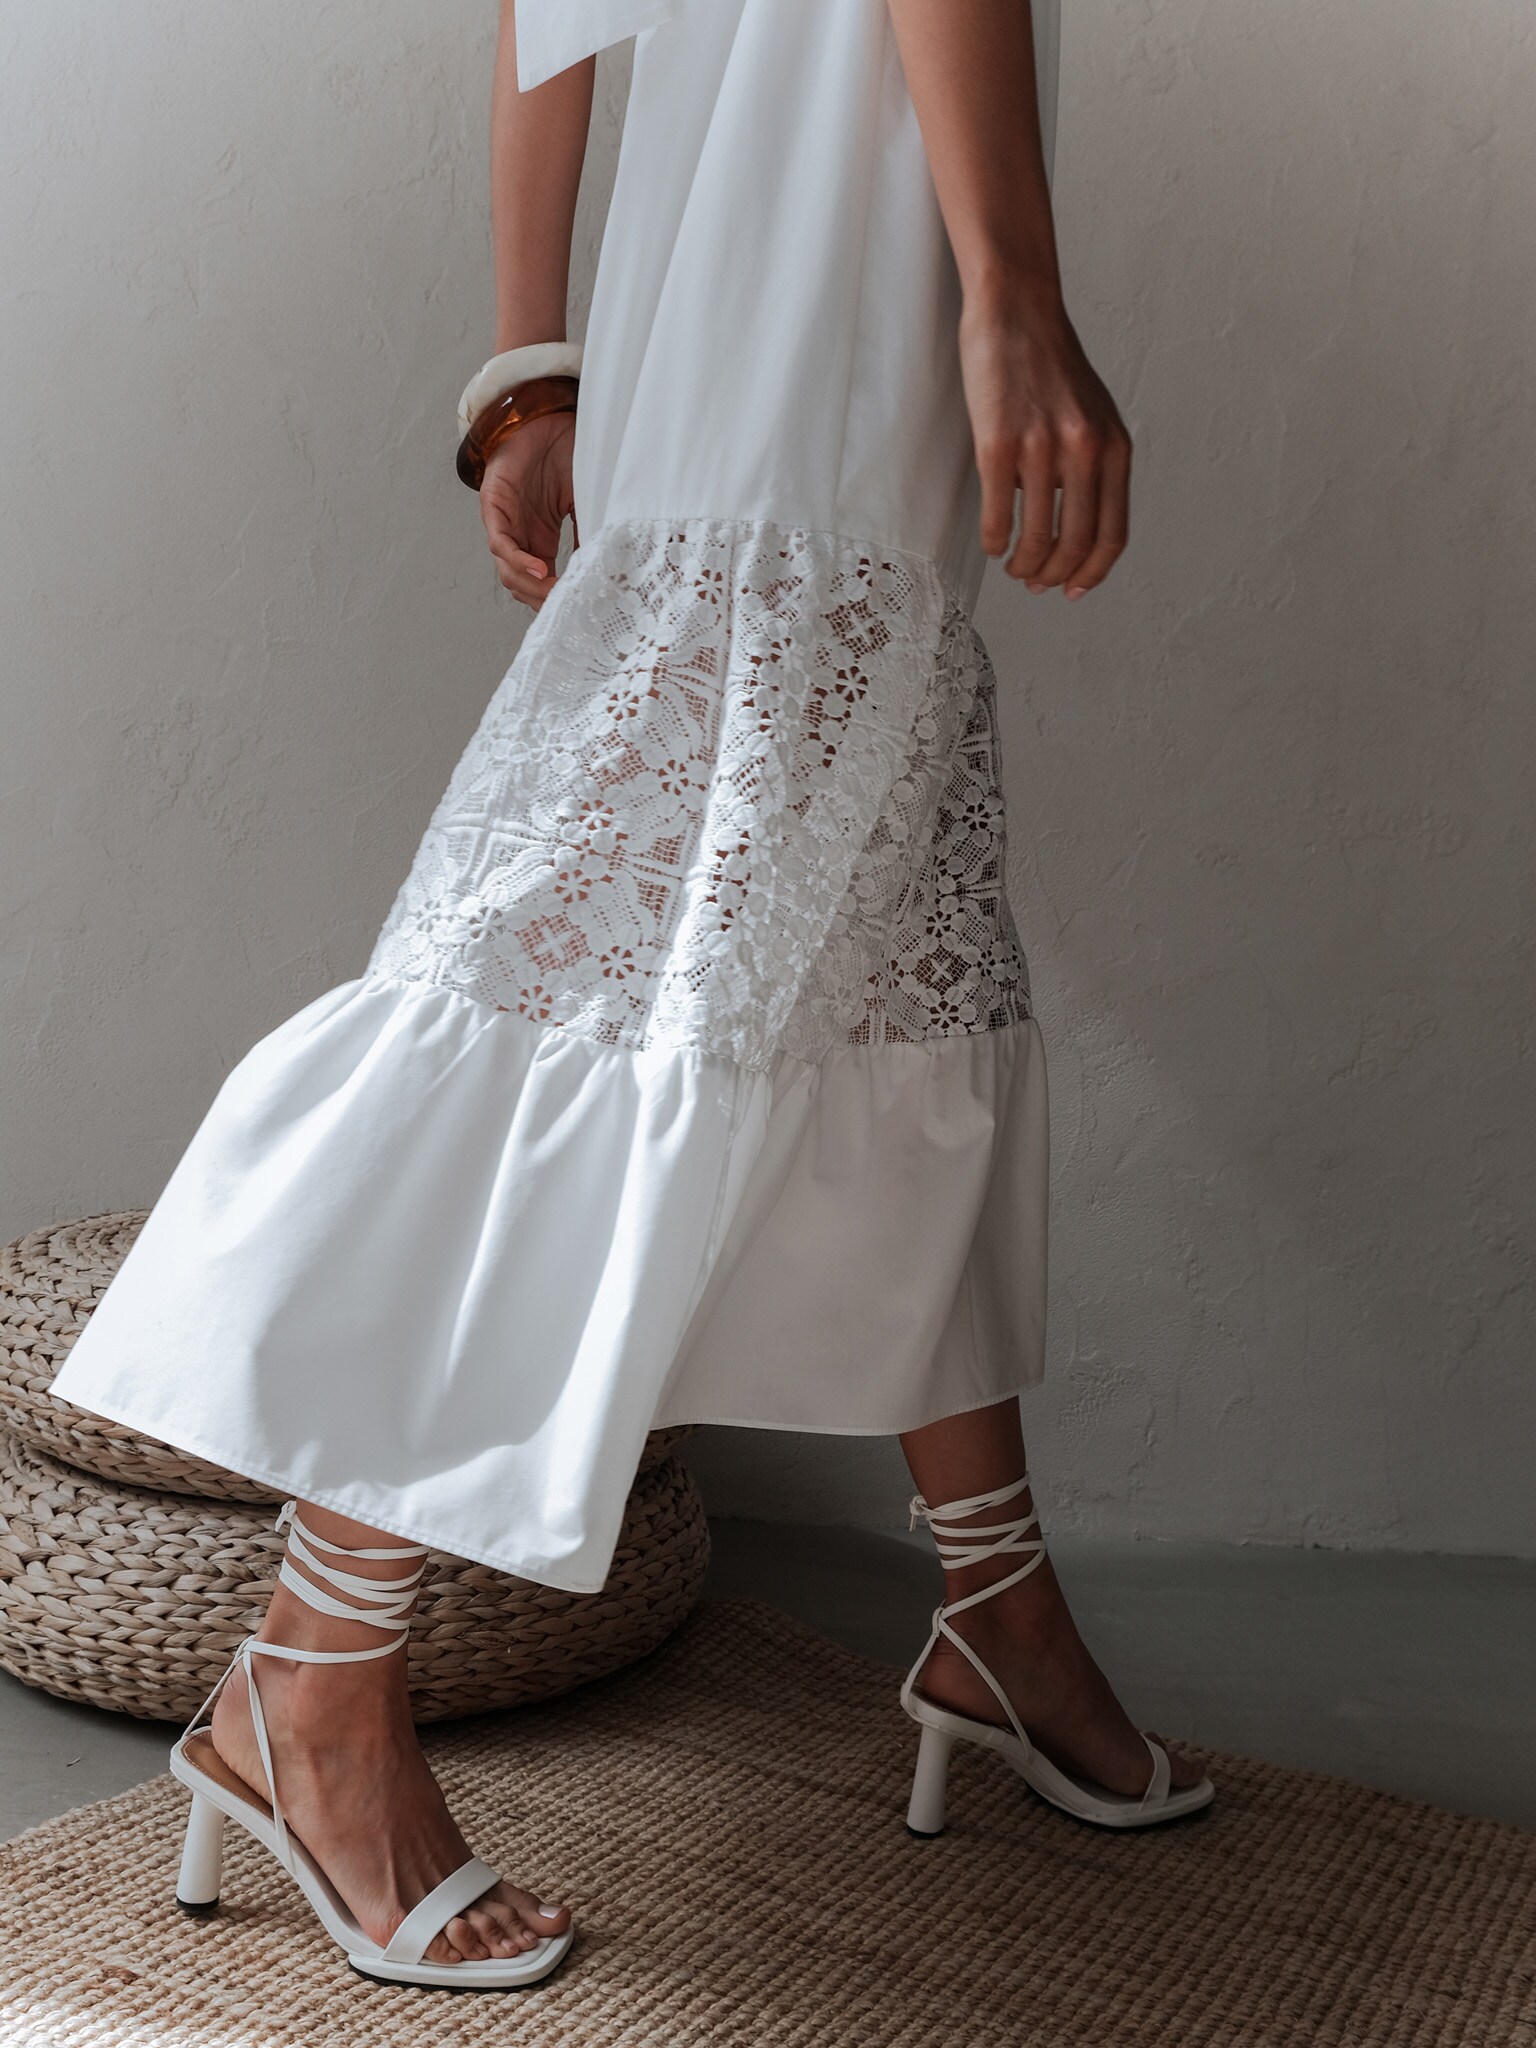 Midi sundress with lace insert on the skirt